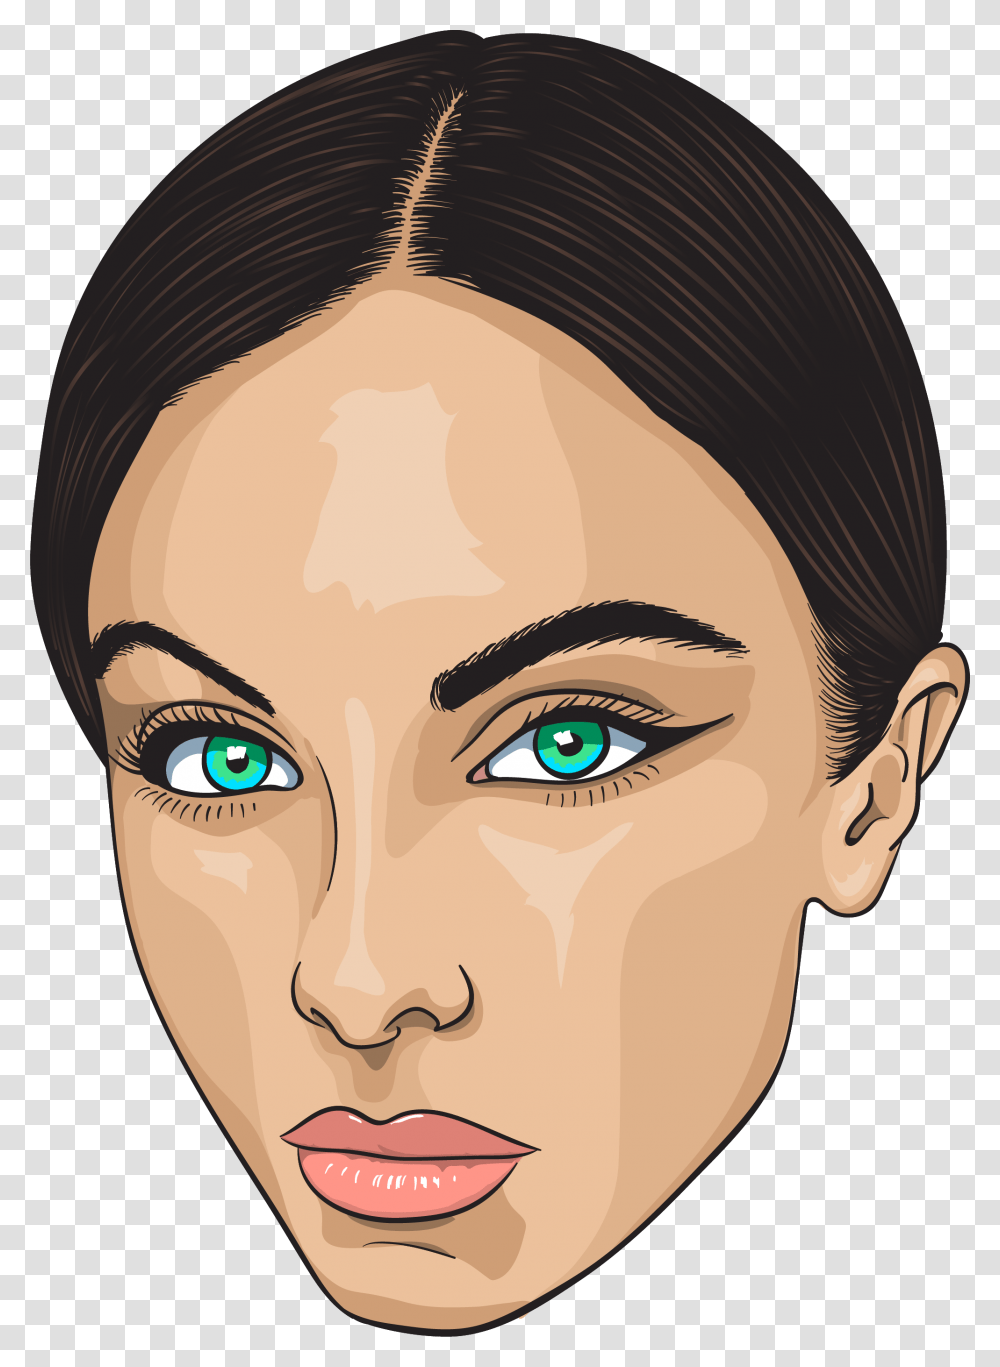 Trade Ads Heads, Face, Skin, Smile, Hair Transparent Png